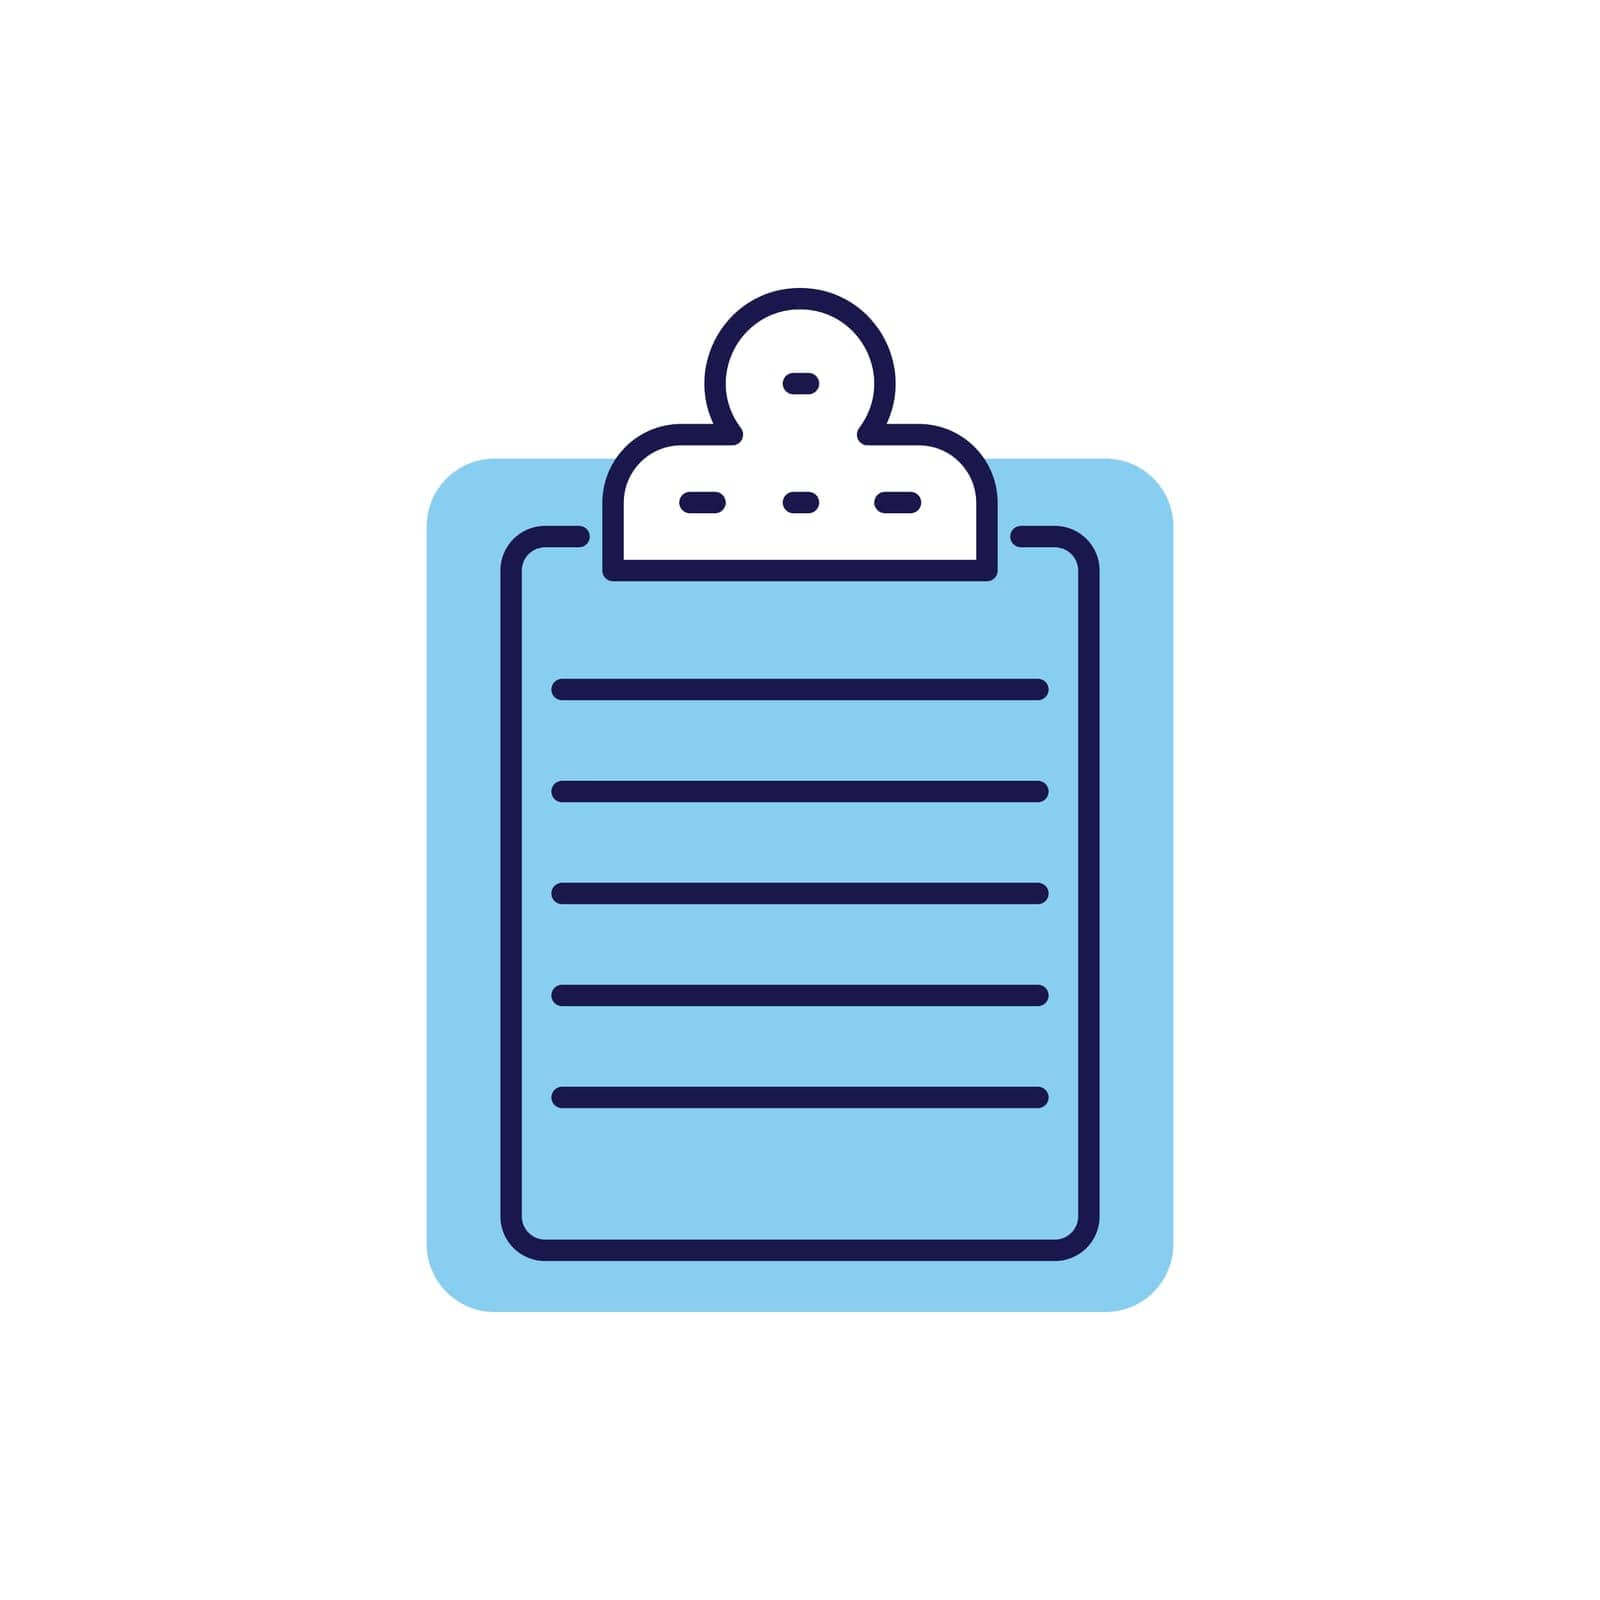 Clipboard related vector icon by smoki